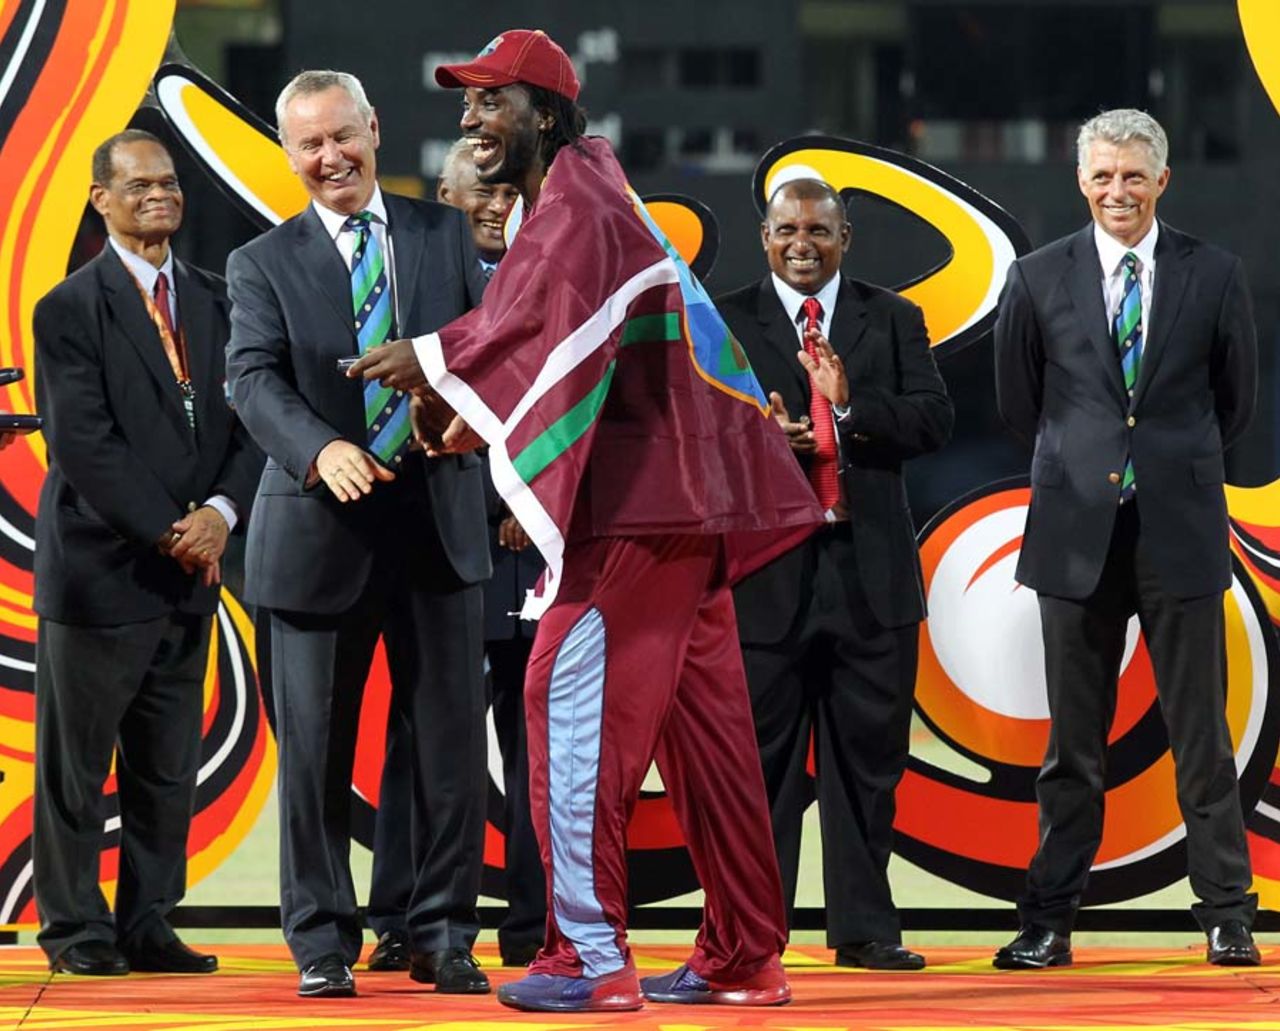 Chris Gayle smiles on his way to collecting the winners' medal, Colombo, October 7, 2012 